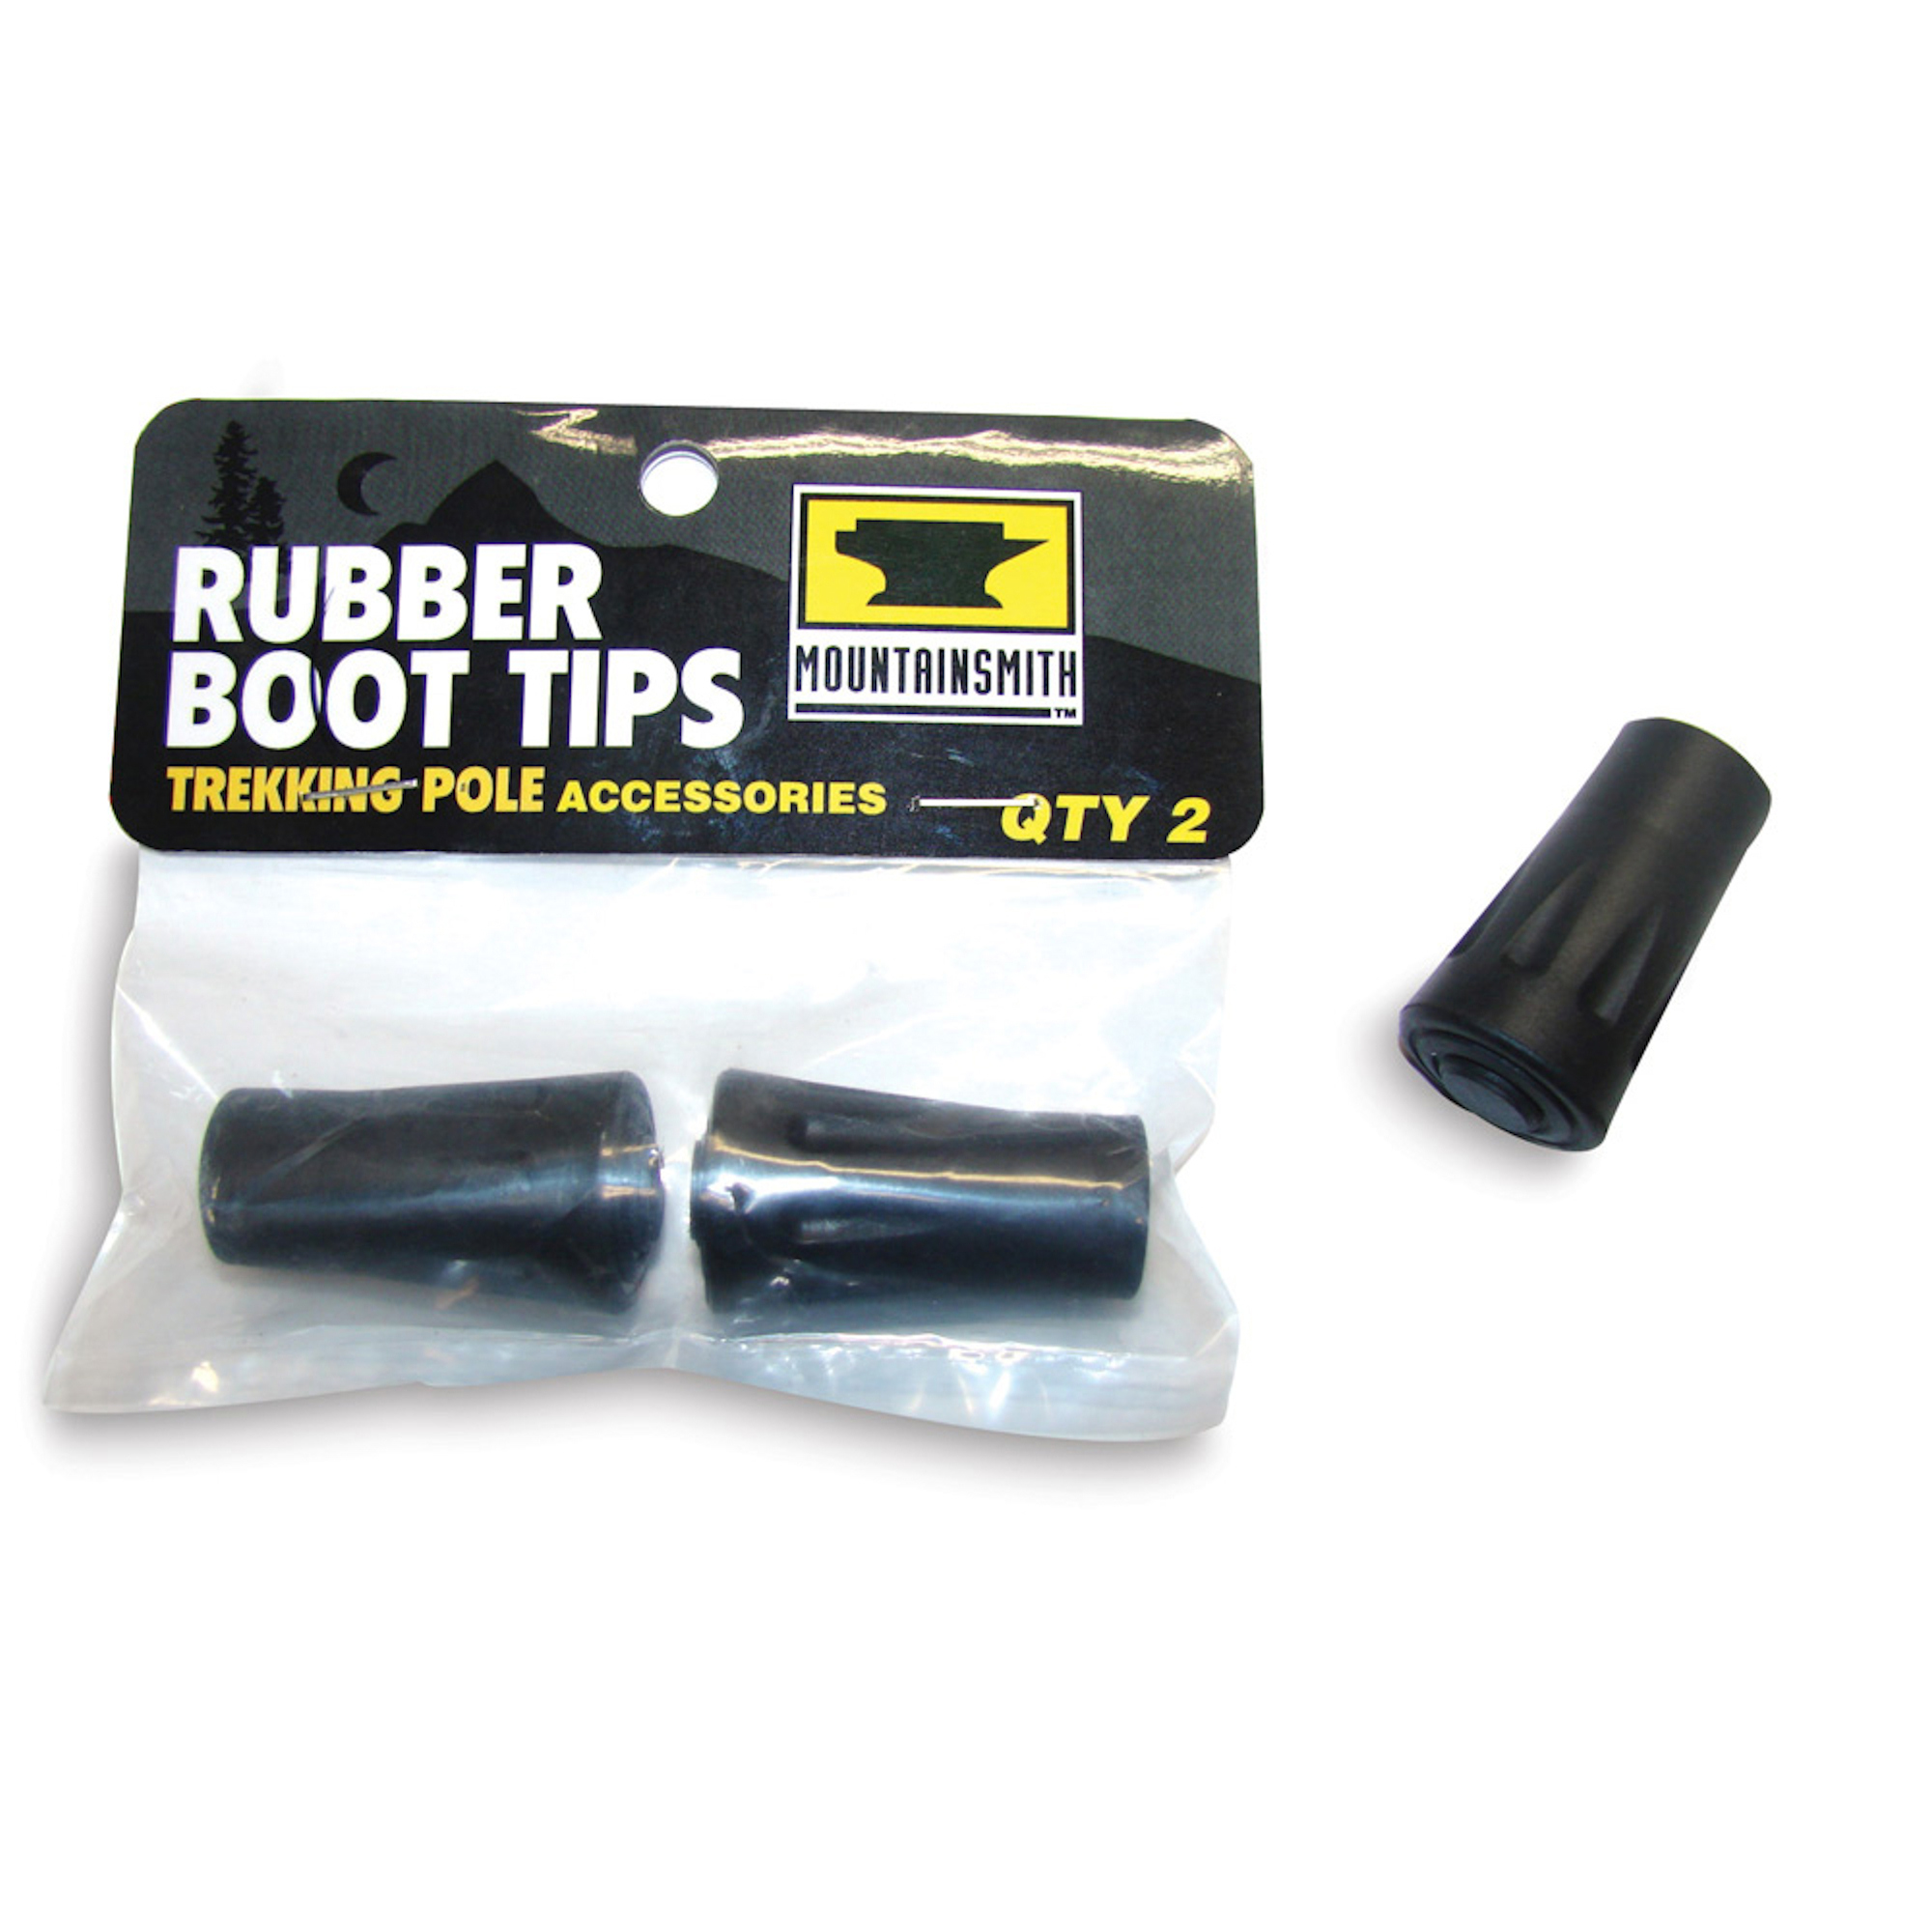 Rubber Boot Tips